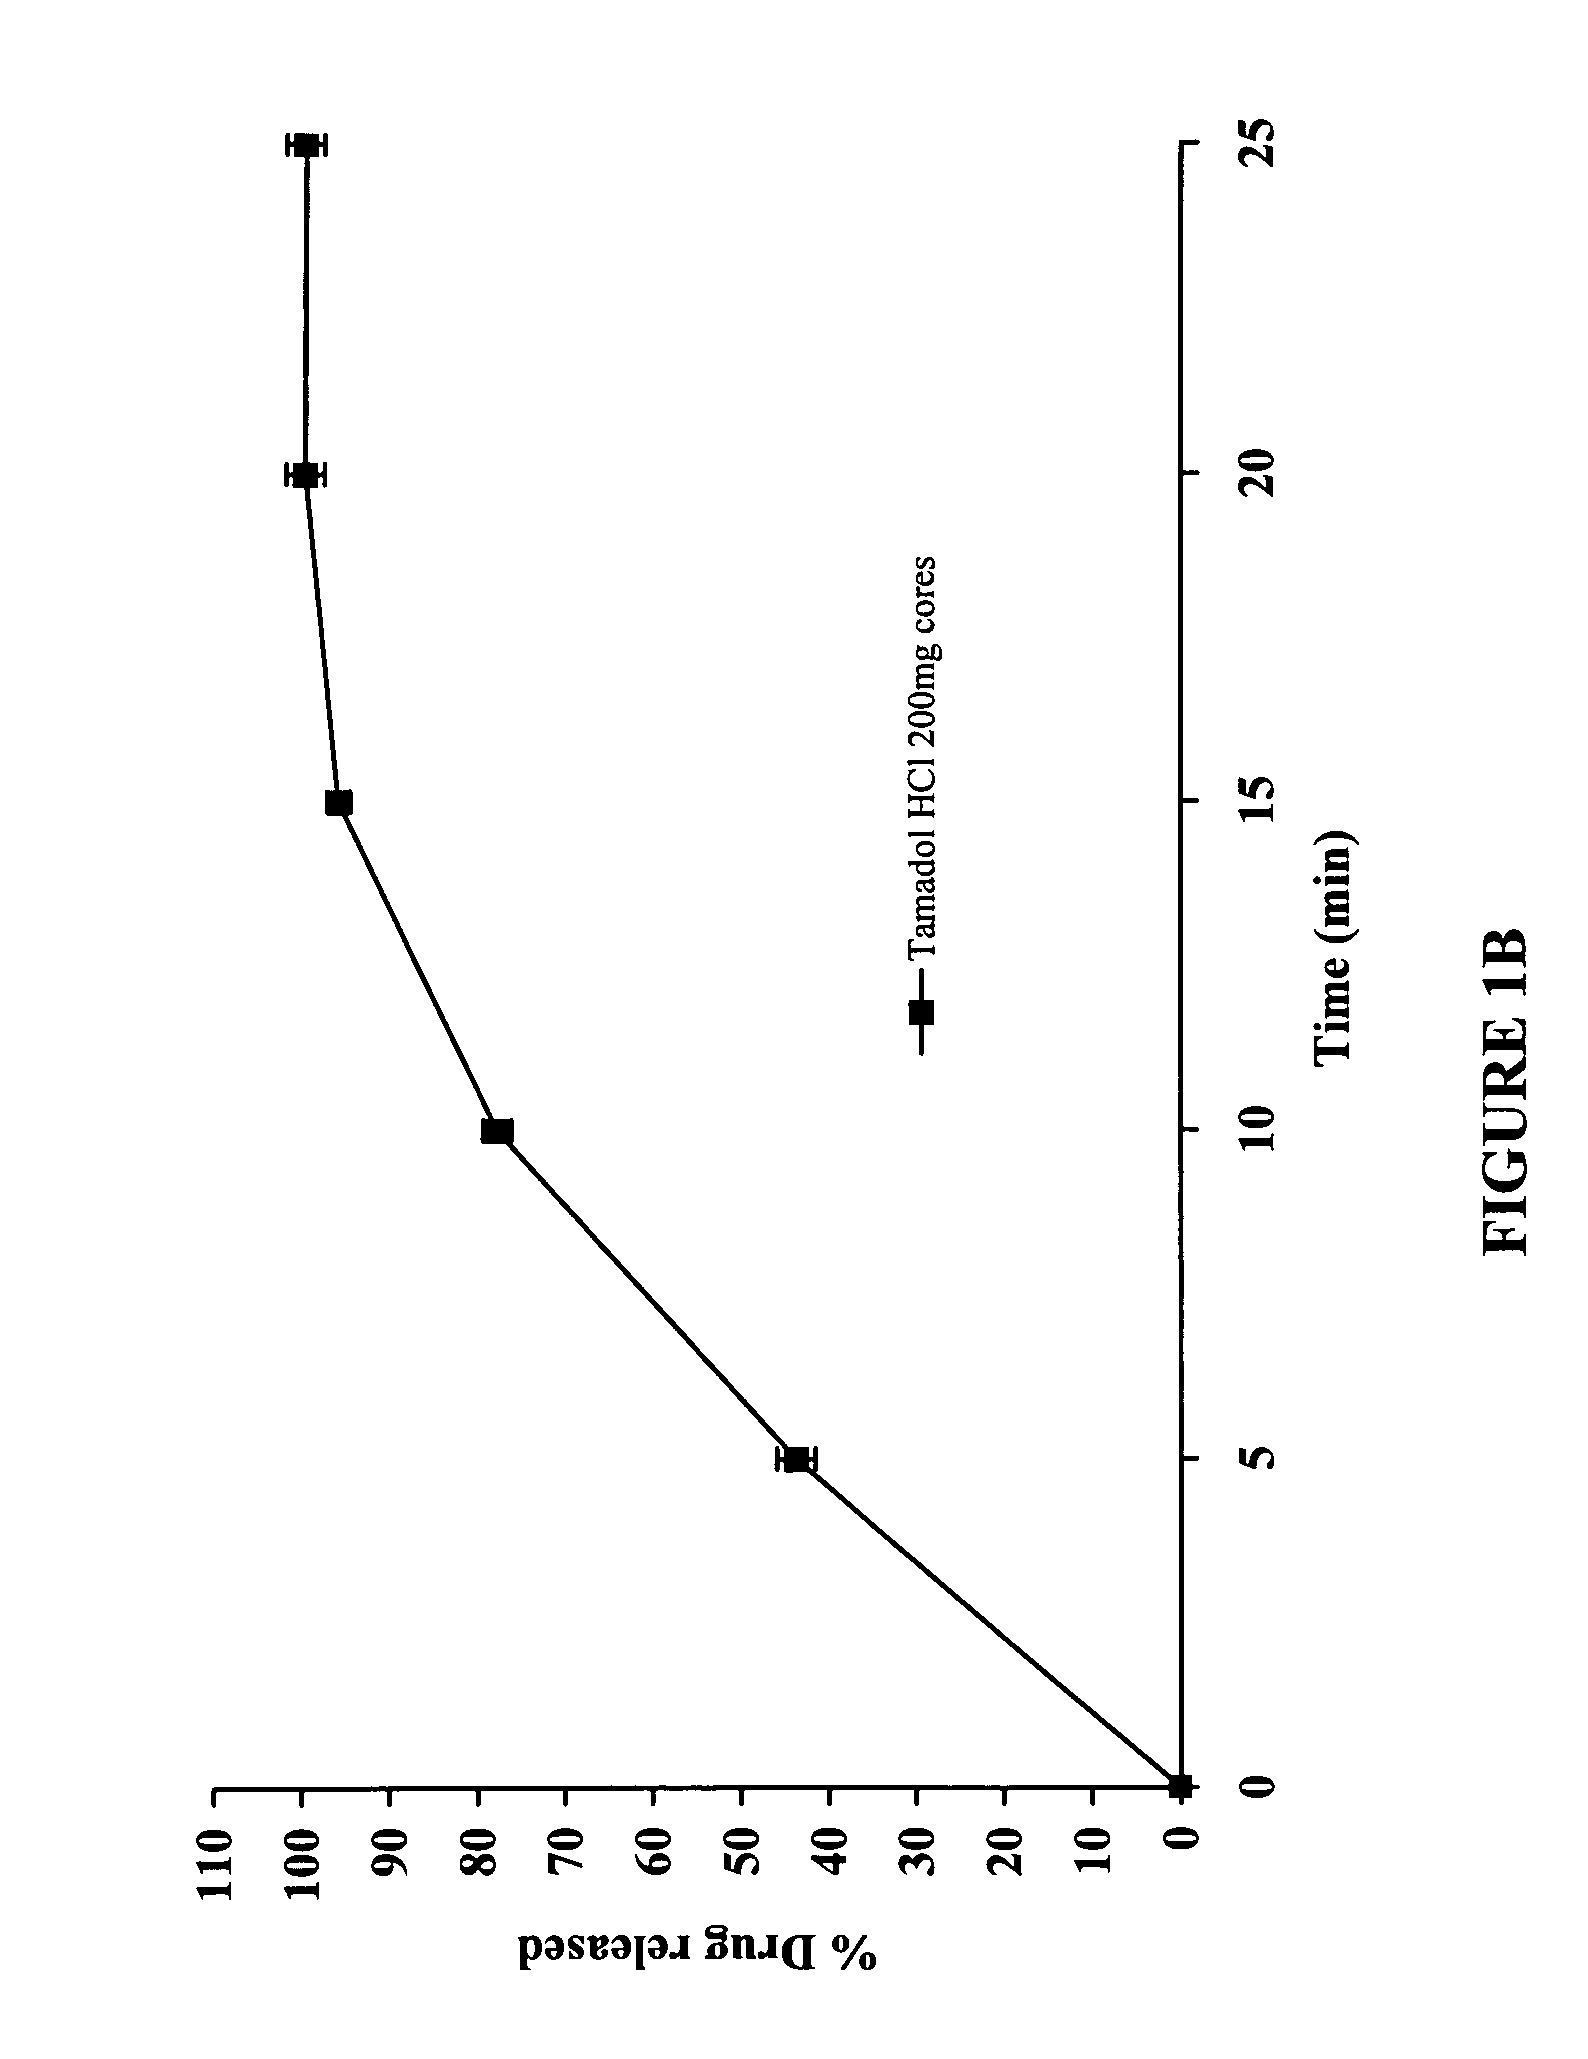 Modified release compositions of at least one form of tramadol